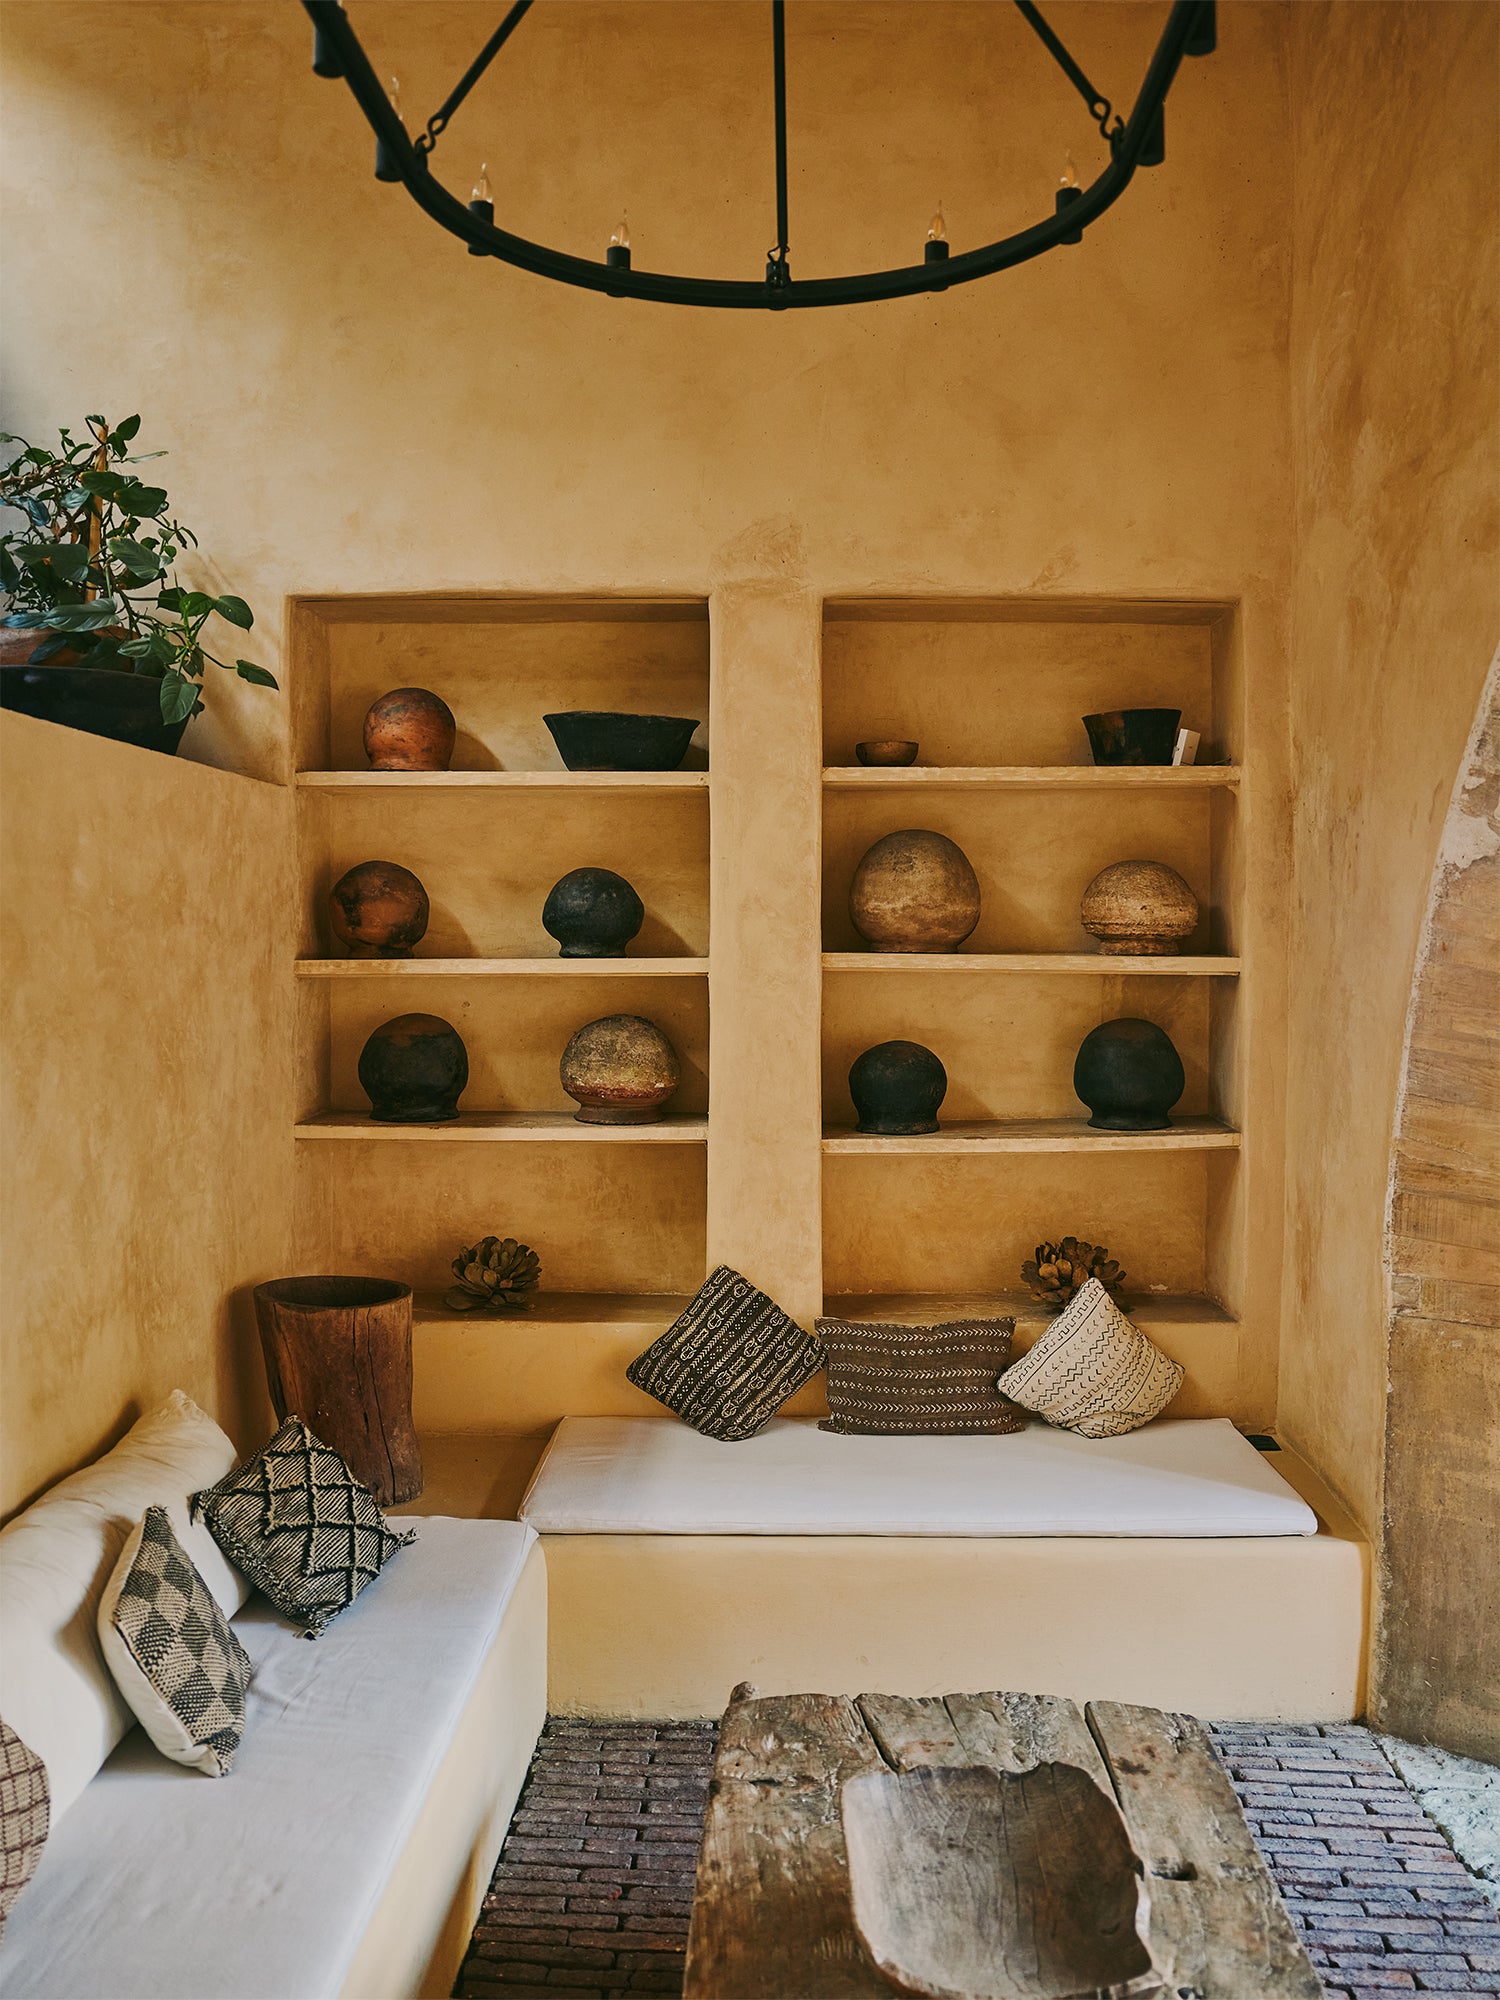 Corner sofas with recessed bookshelves and plaster walls behind in Hotel Escondido, Oaxaca.